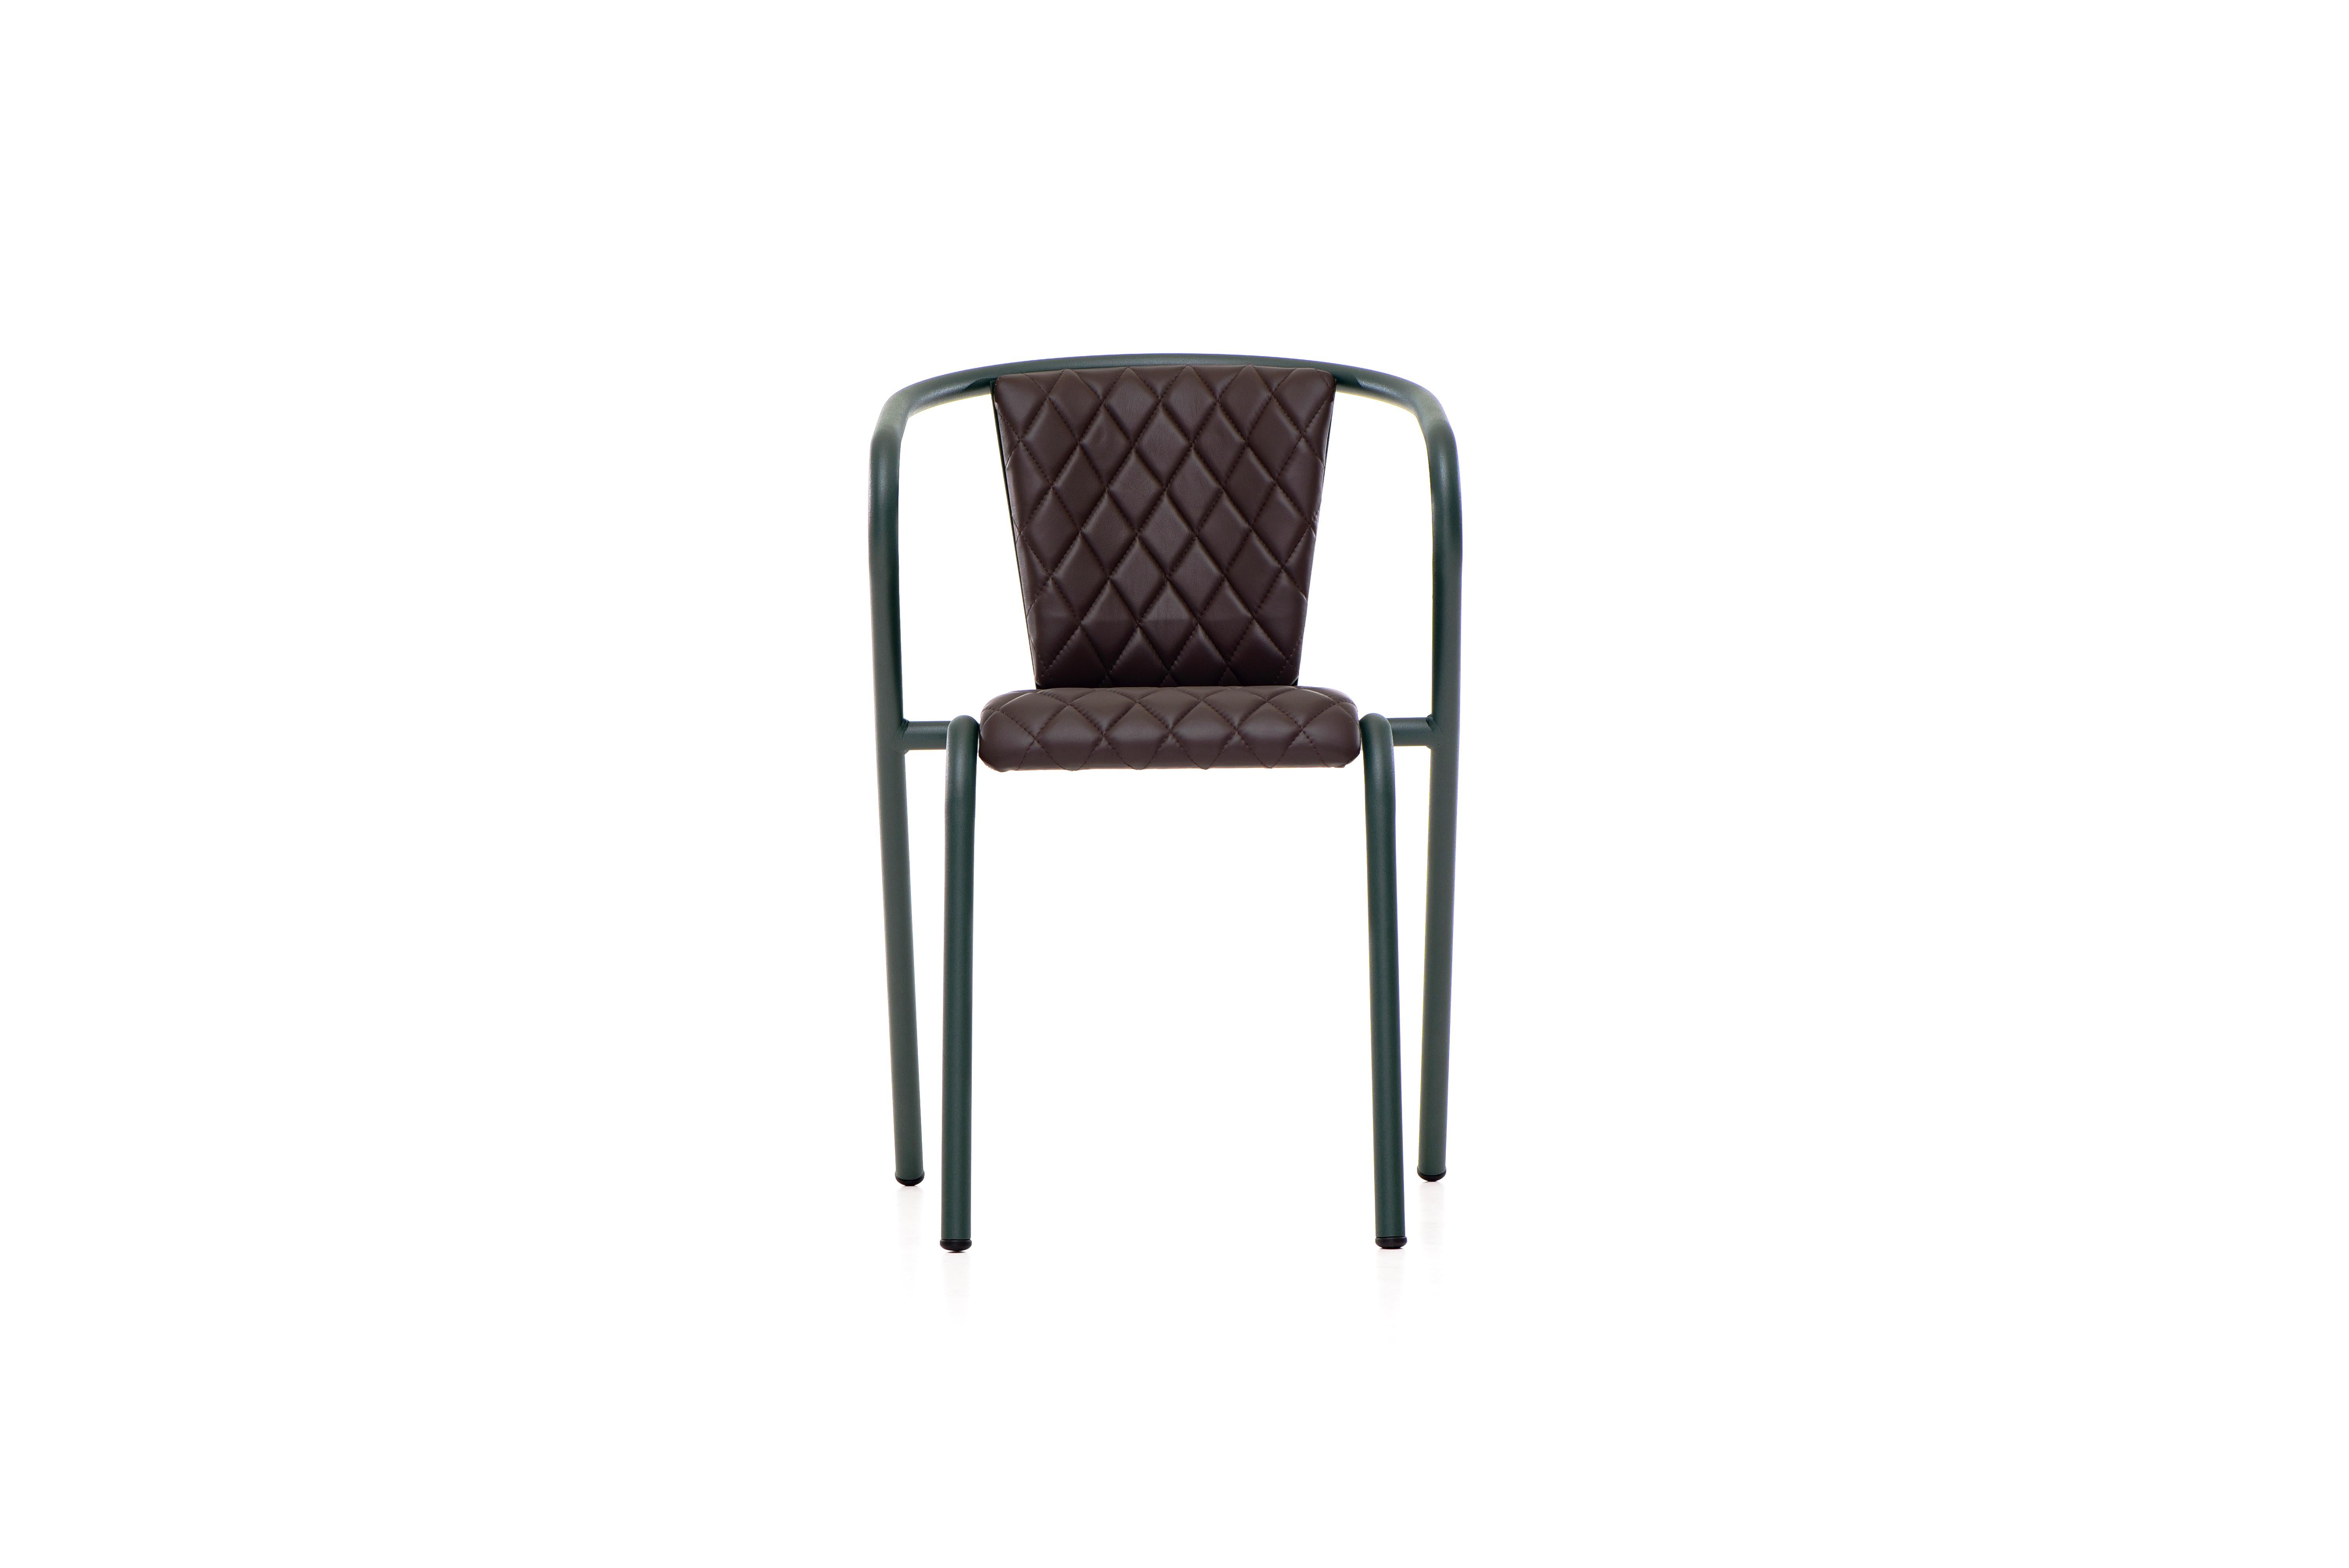 The BICA chair is a comfortable stackable dining armchair made from recycled and recyclable steel, finished with our premium selection of powder-coating colors, in this case in a texturized Deep Green, that transform a classic in something new and